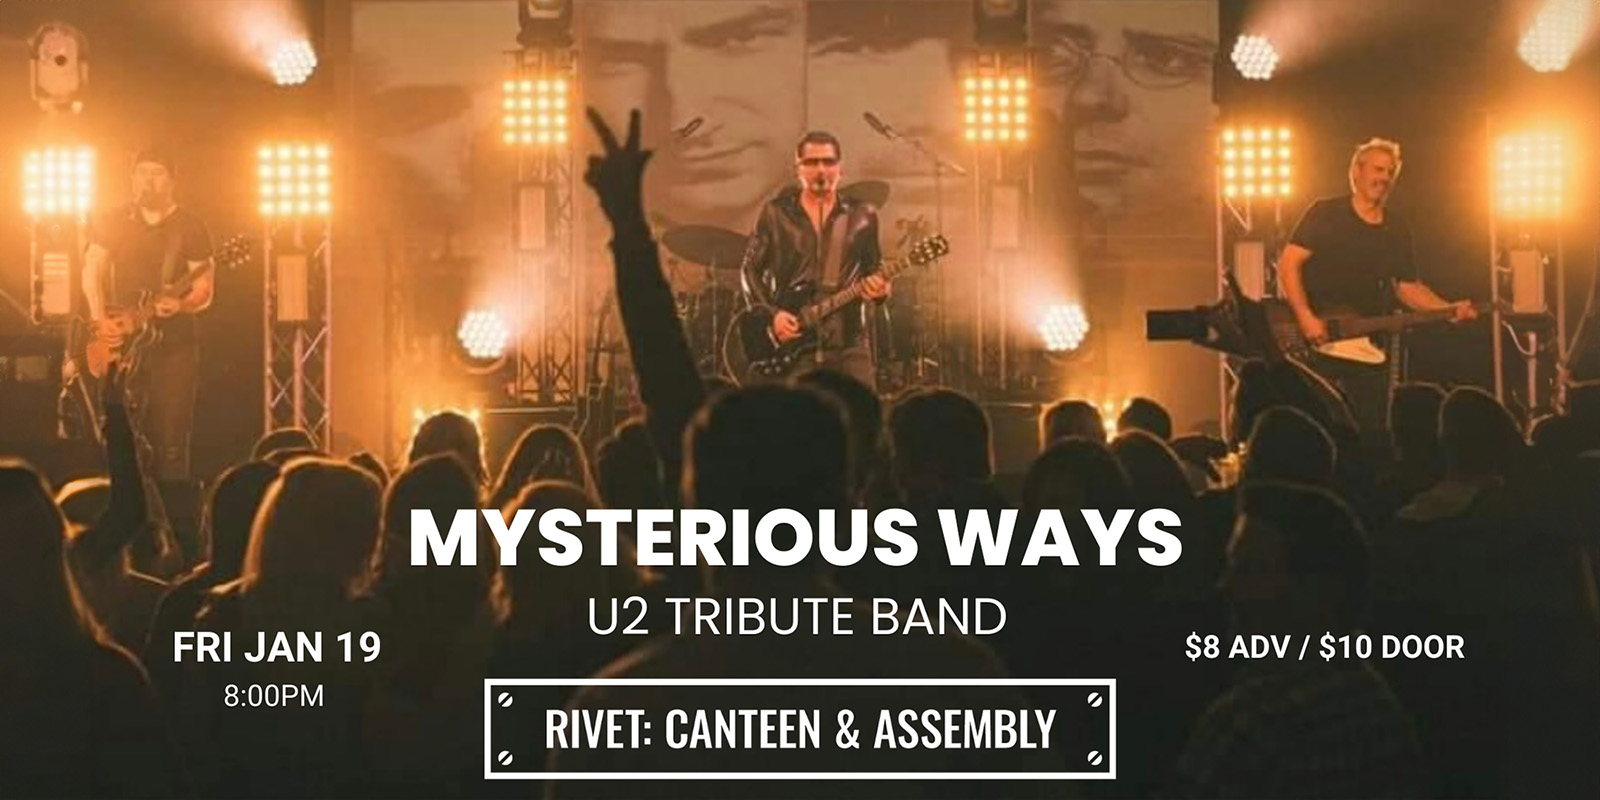 Mysterious Ways (The U2 Tribute Band) live at Rivet: Canteen & Assembly on Friday, January 19th, 2024. All ages are welcome and tickets are on sale now!